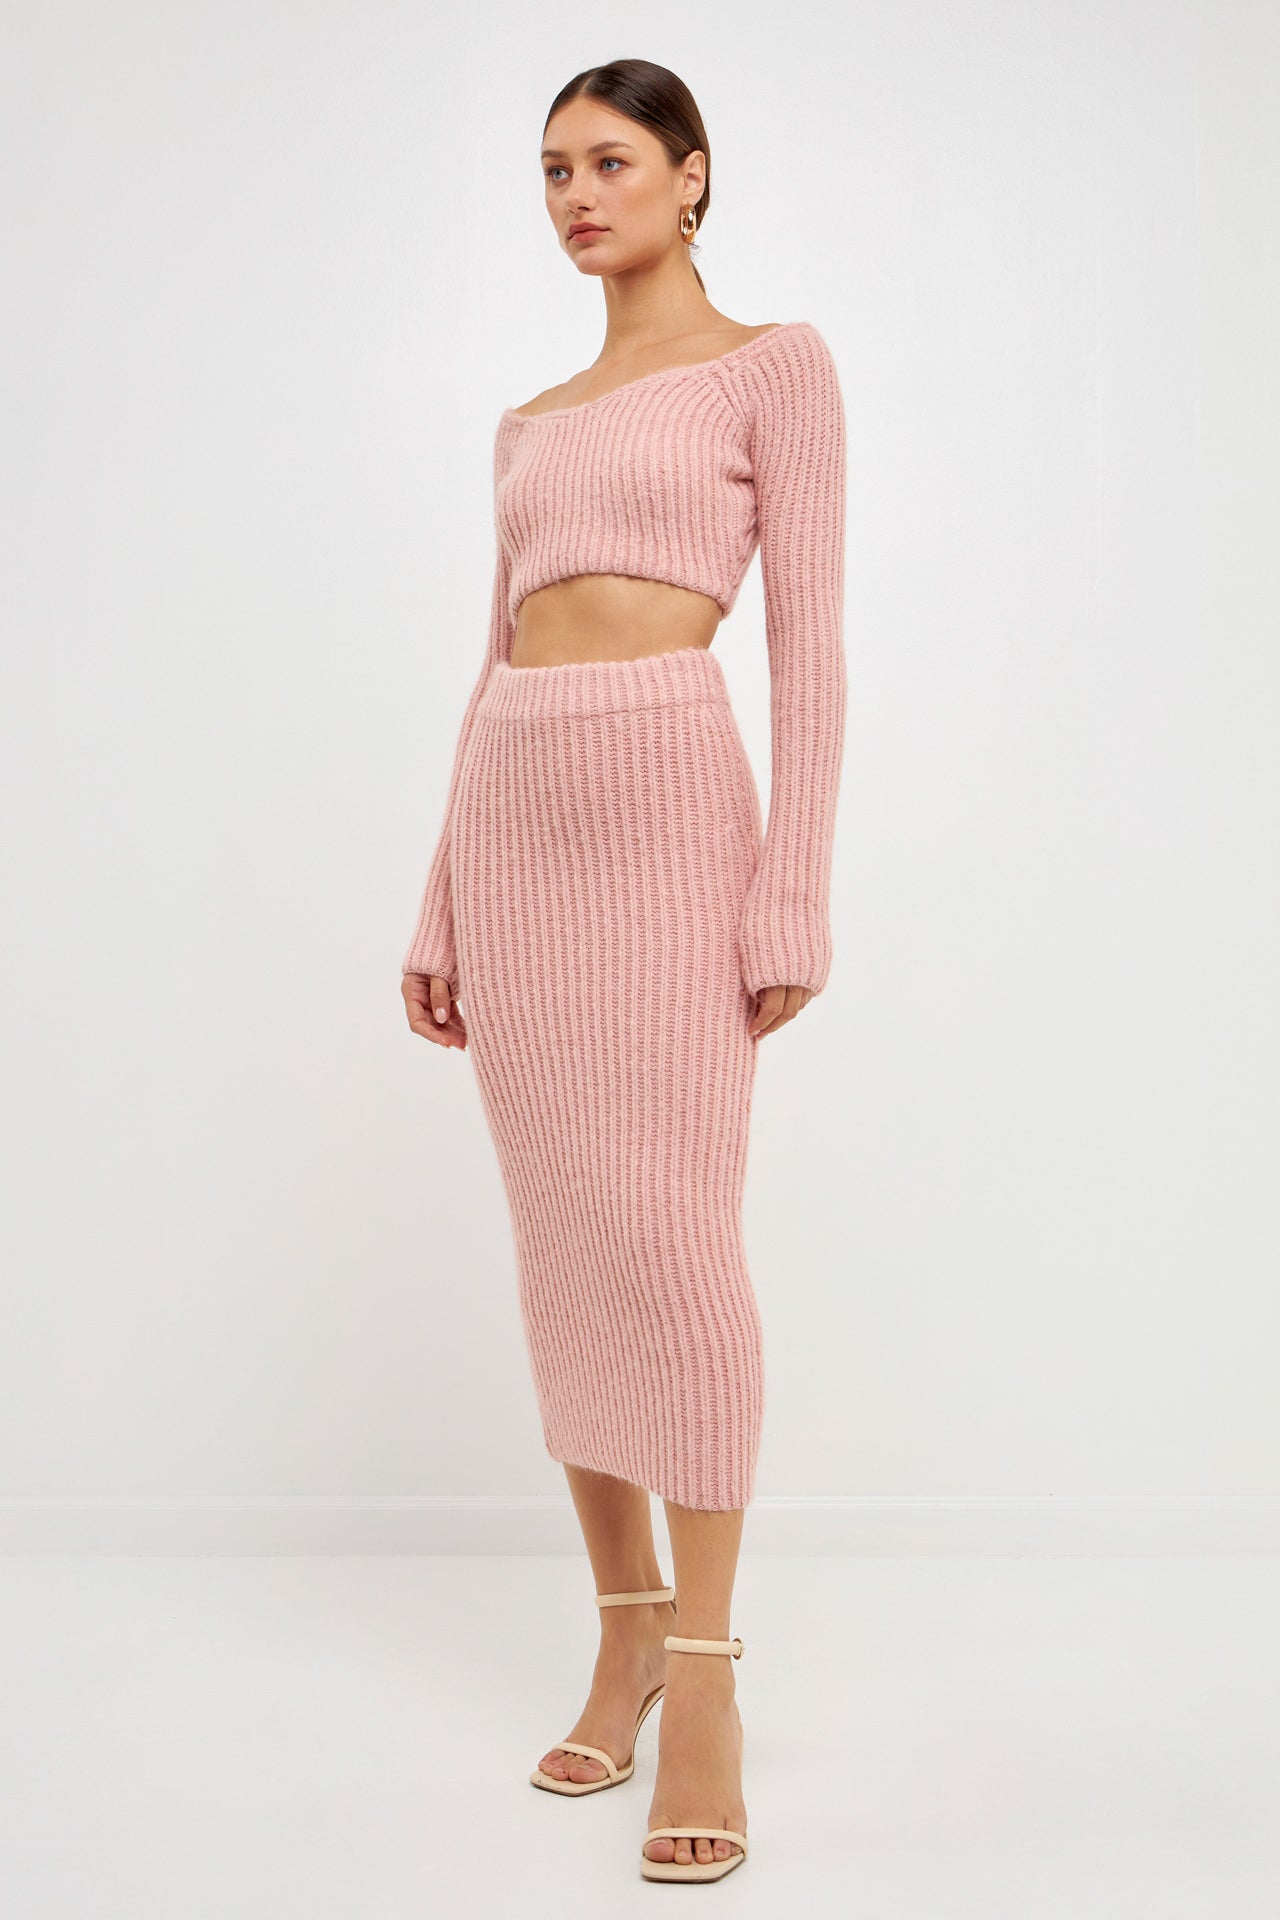 ENDLESS ROSE - High-Waisted Knit Midi Skirt - SKIRTS available at Objectrare